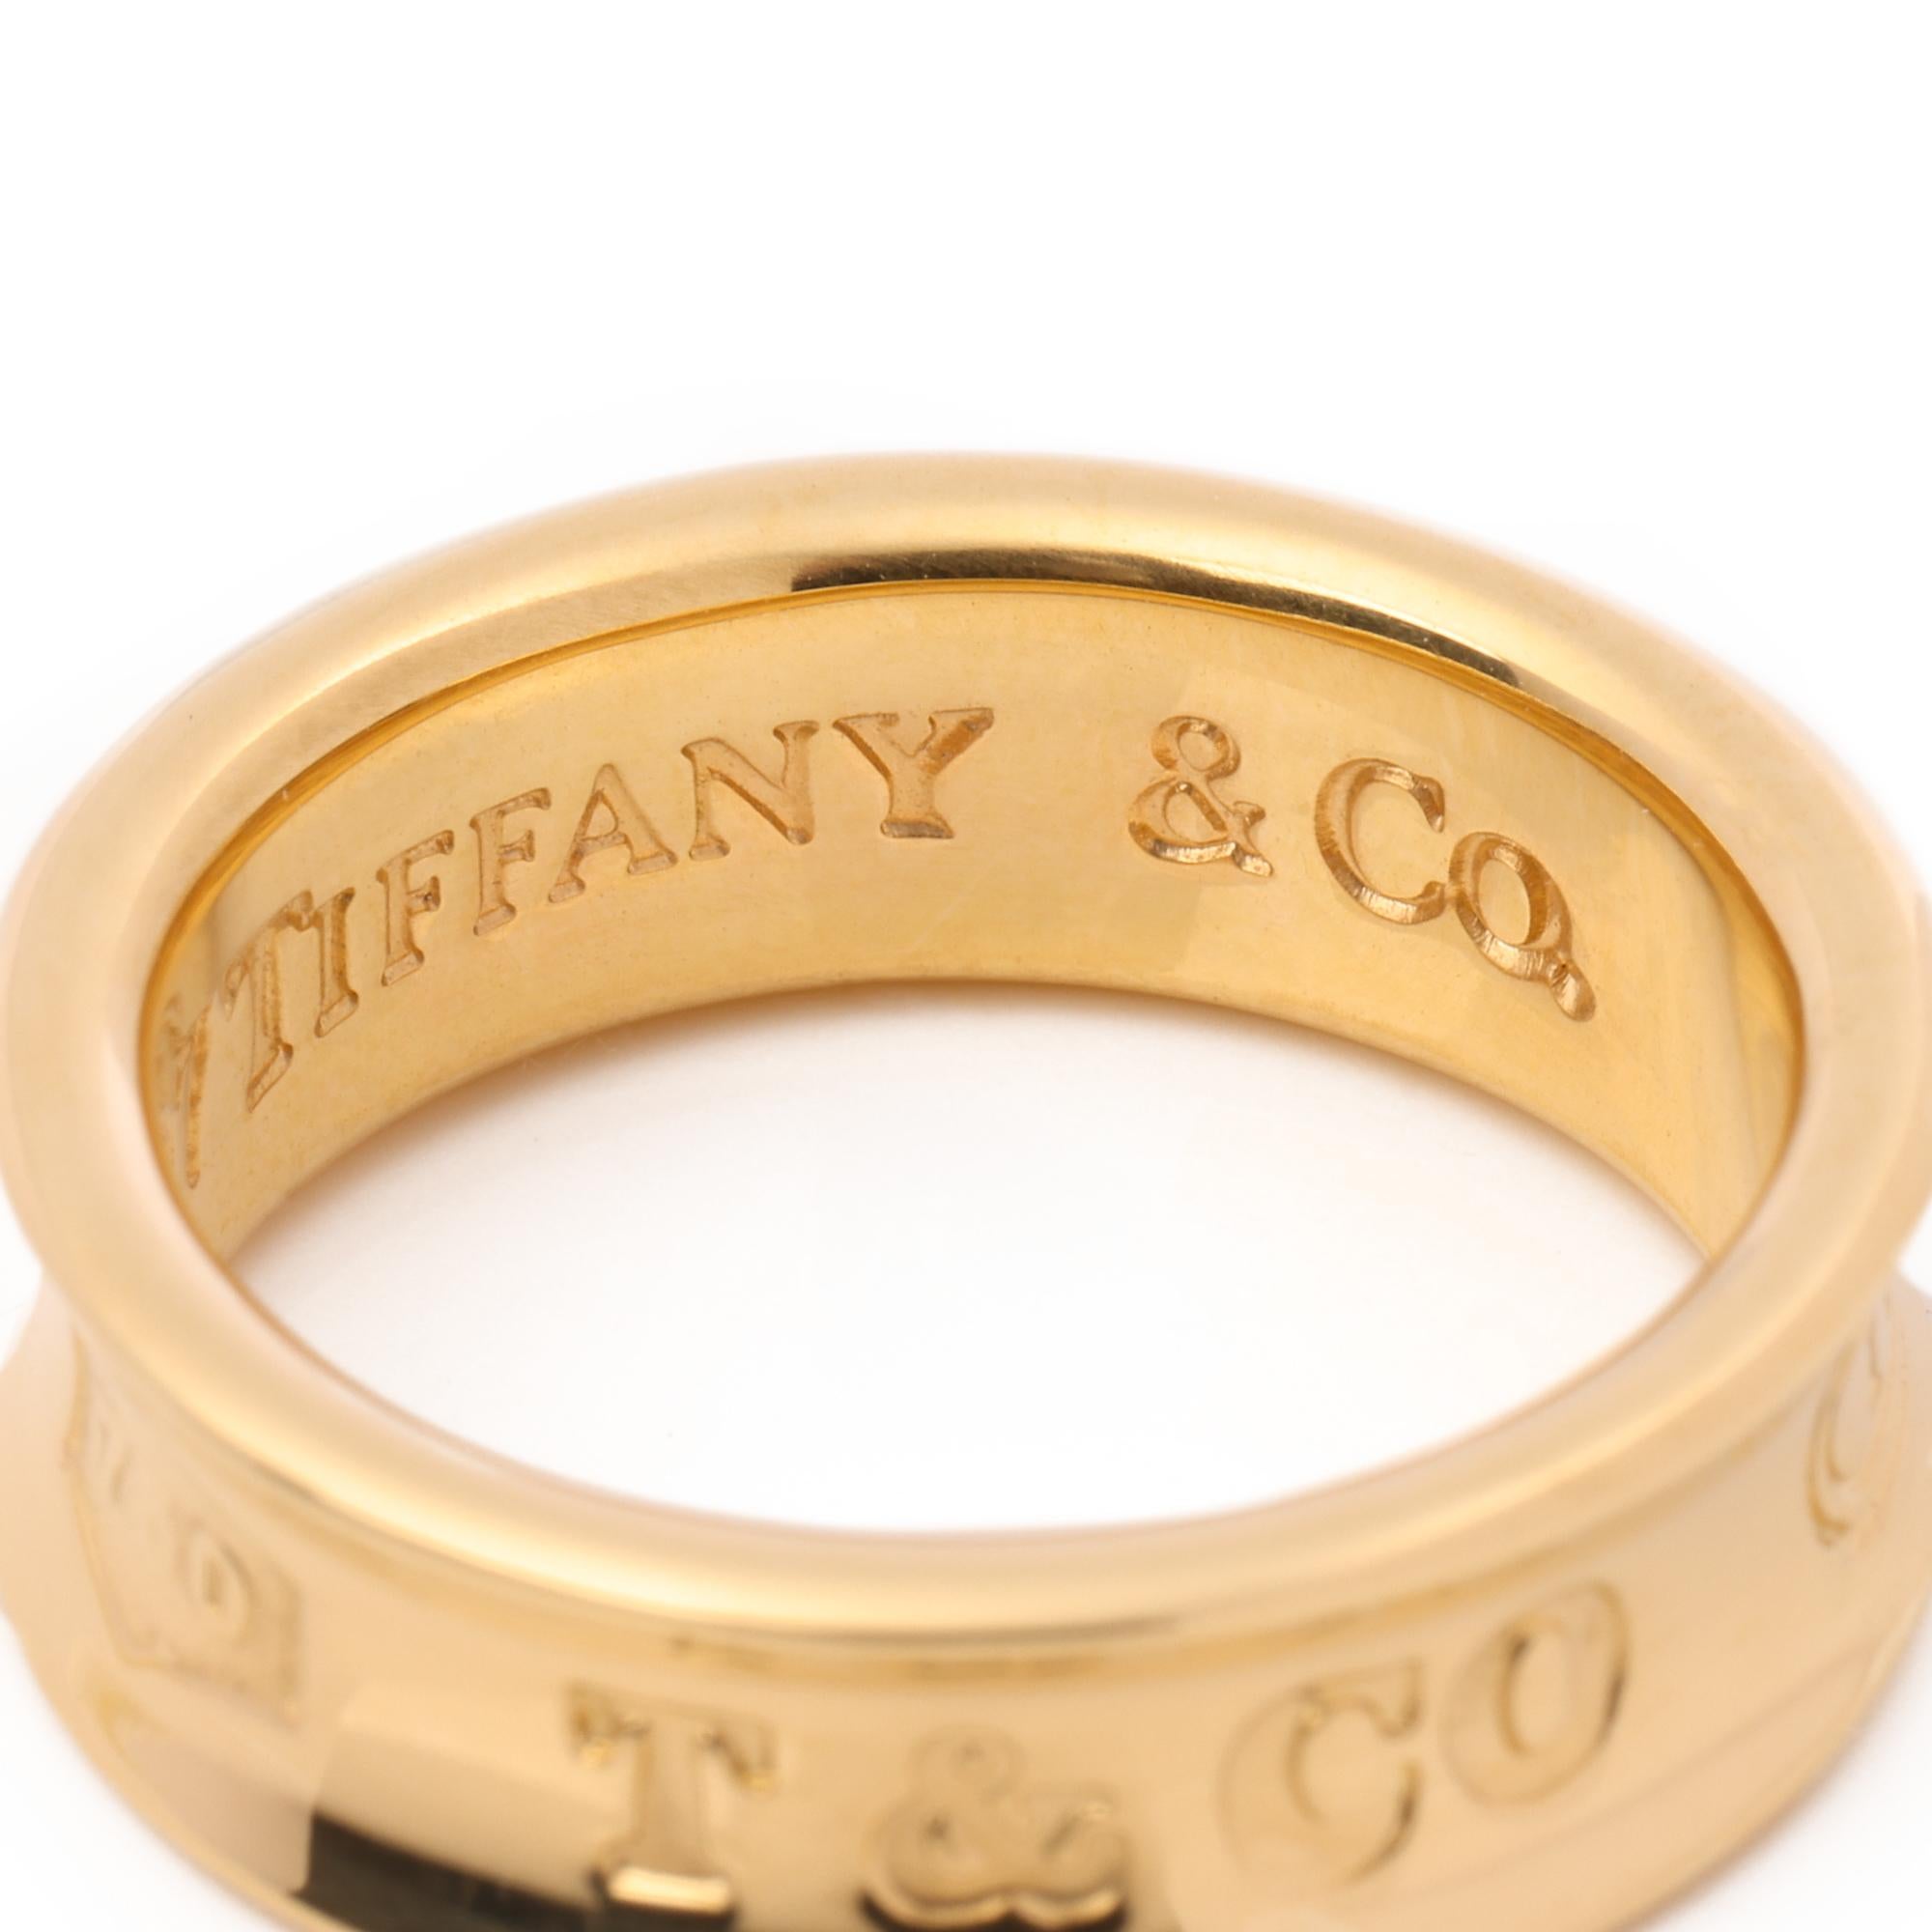 Tiffany & Co. 1837 Band Ring  In Excellent Condition For Sale In Bishop's Stortford, Hertfordshire